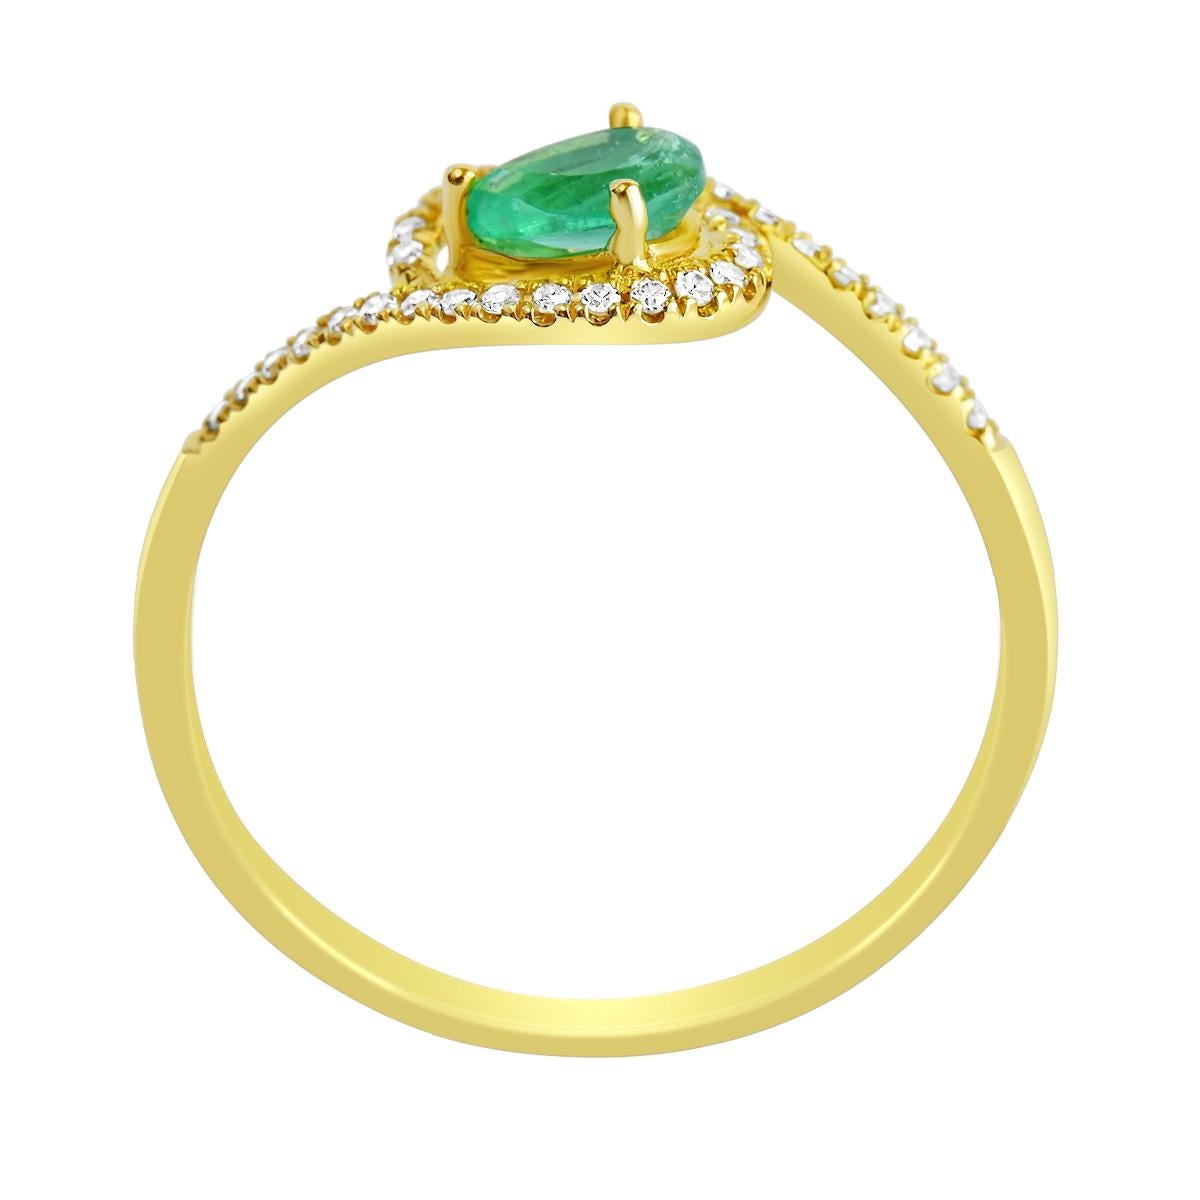 Women's 0.30 Carat Natural Pear Emerald Solid Gold Ring with 34 Microset Bright Diamonds